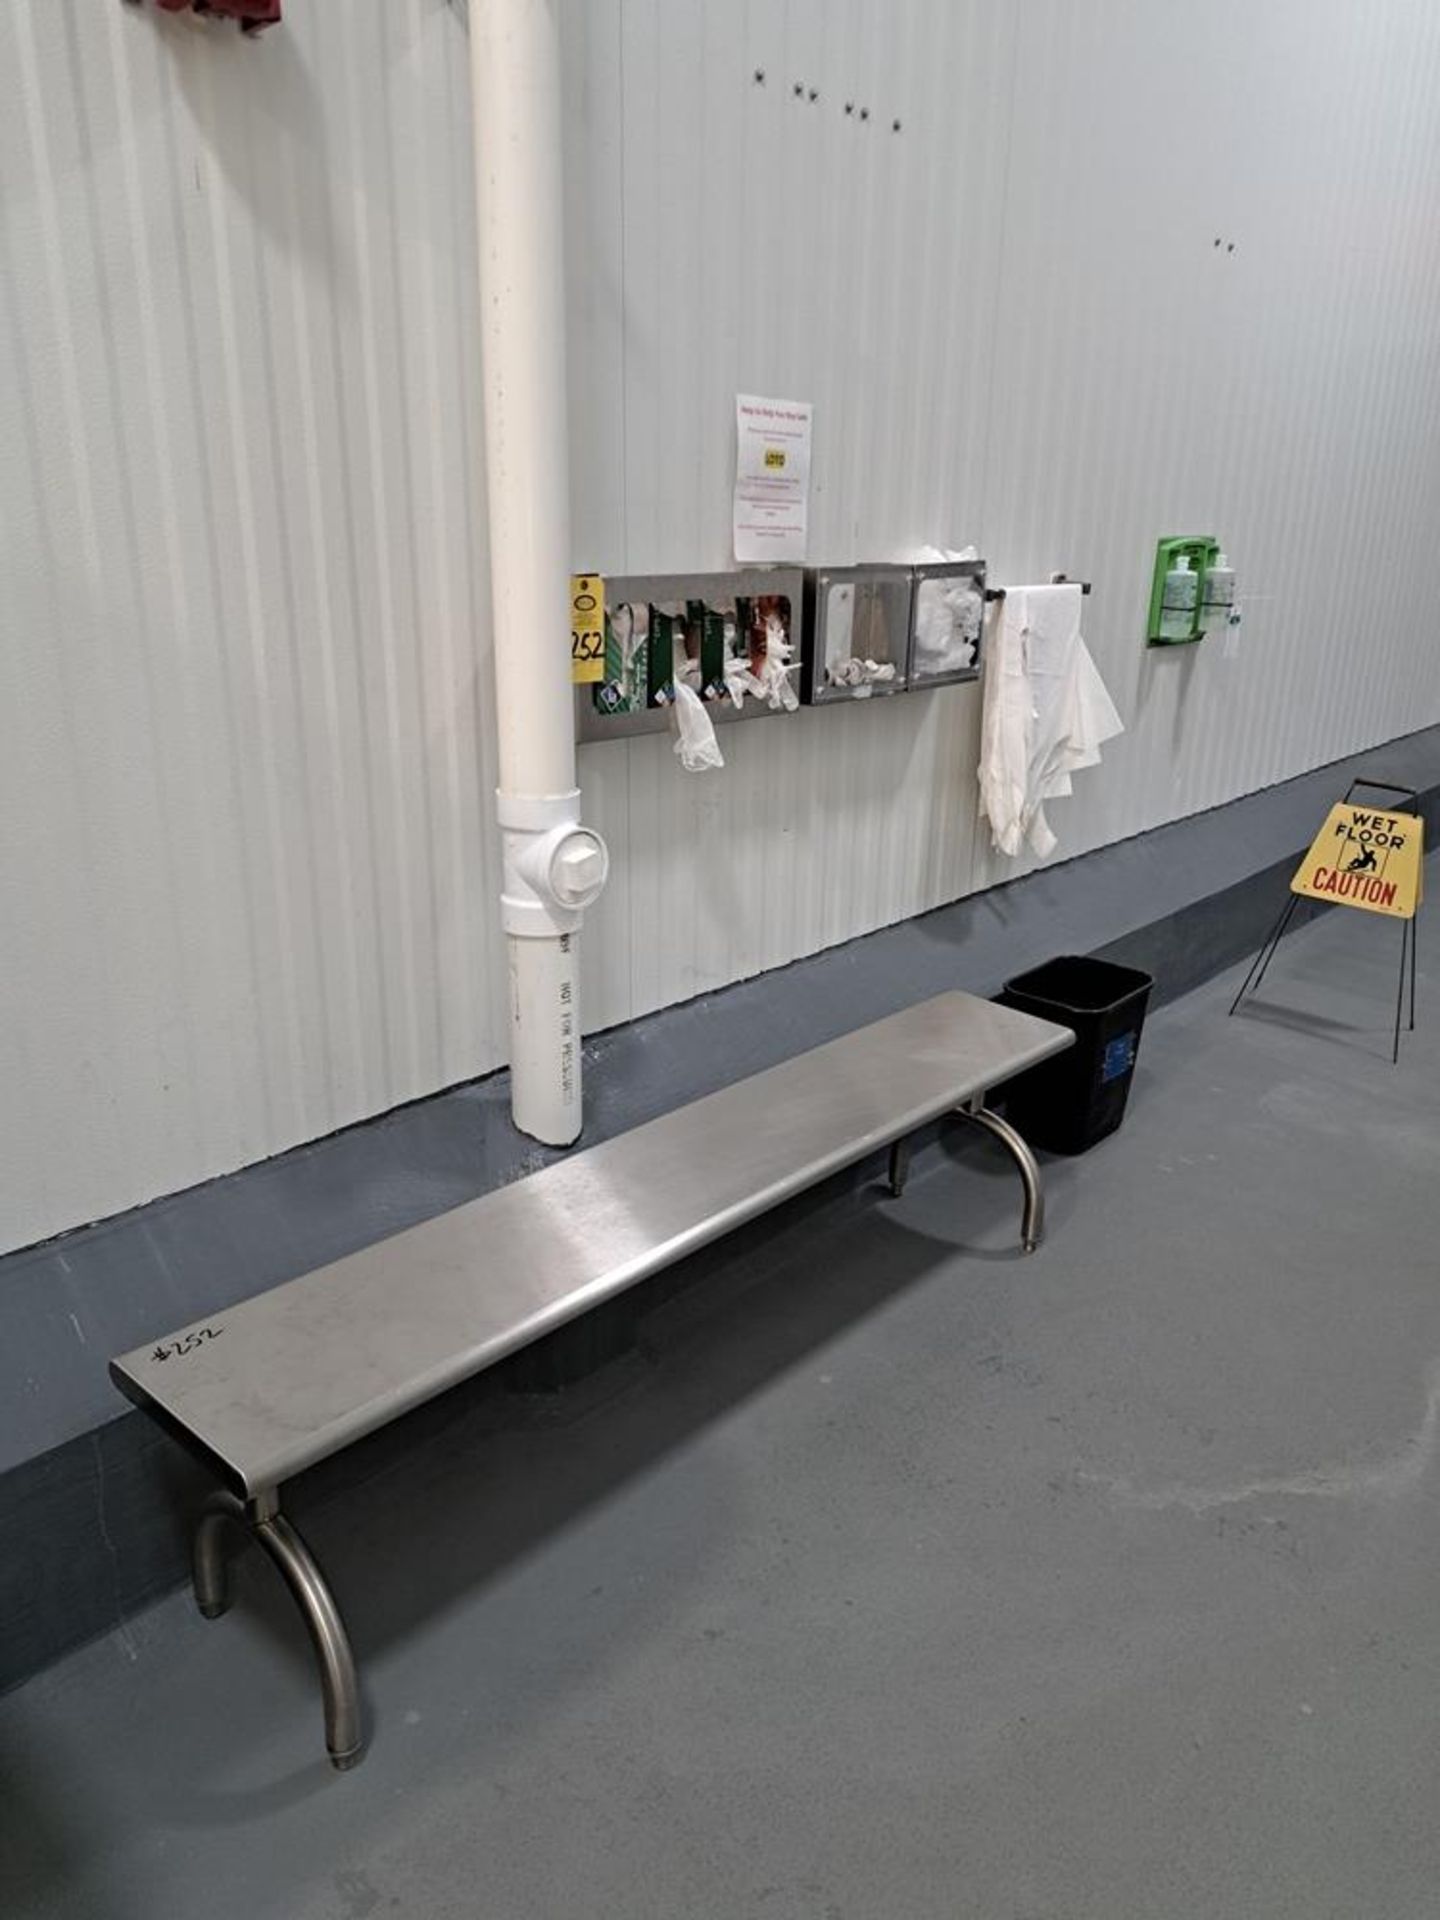 Lot Stainless Steel Bench, 6' long, P.P.E Caddy's, Eye Wash Station-Removal Is By Appointment Only-